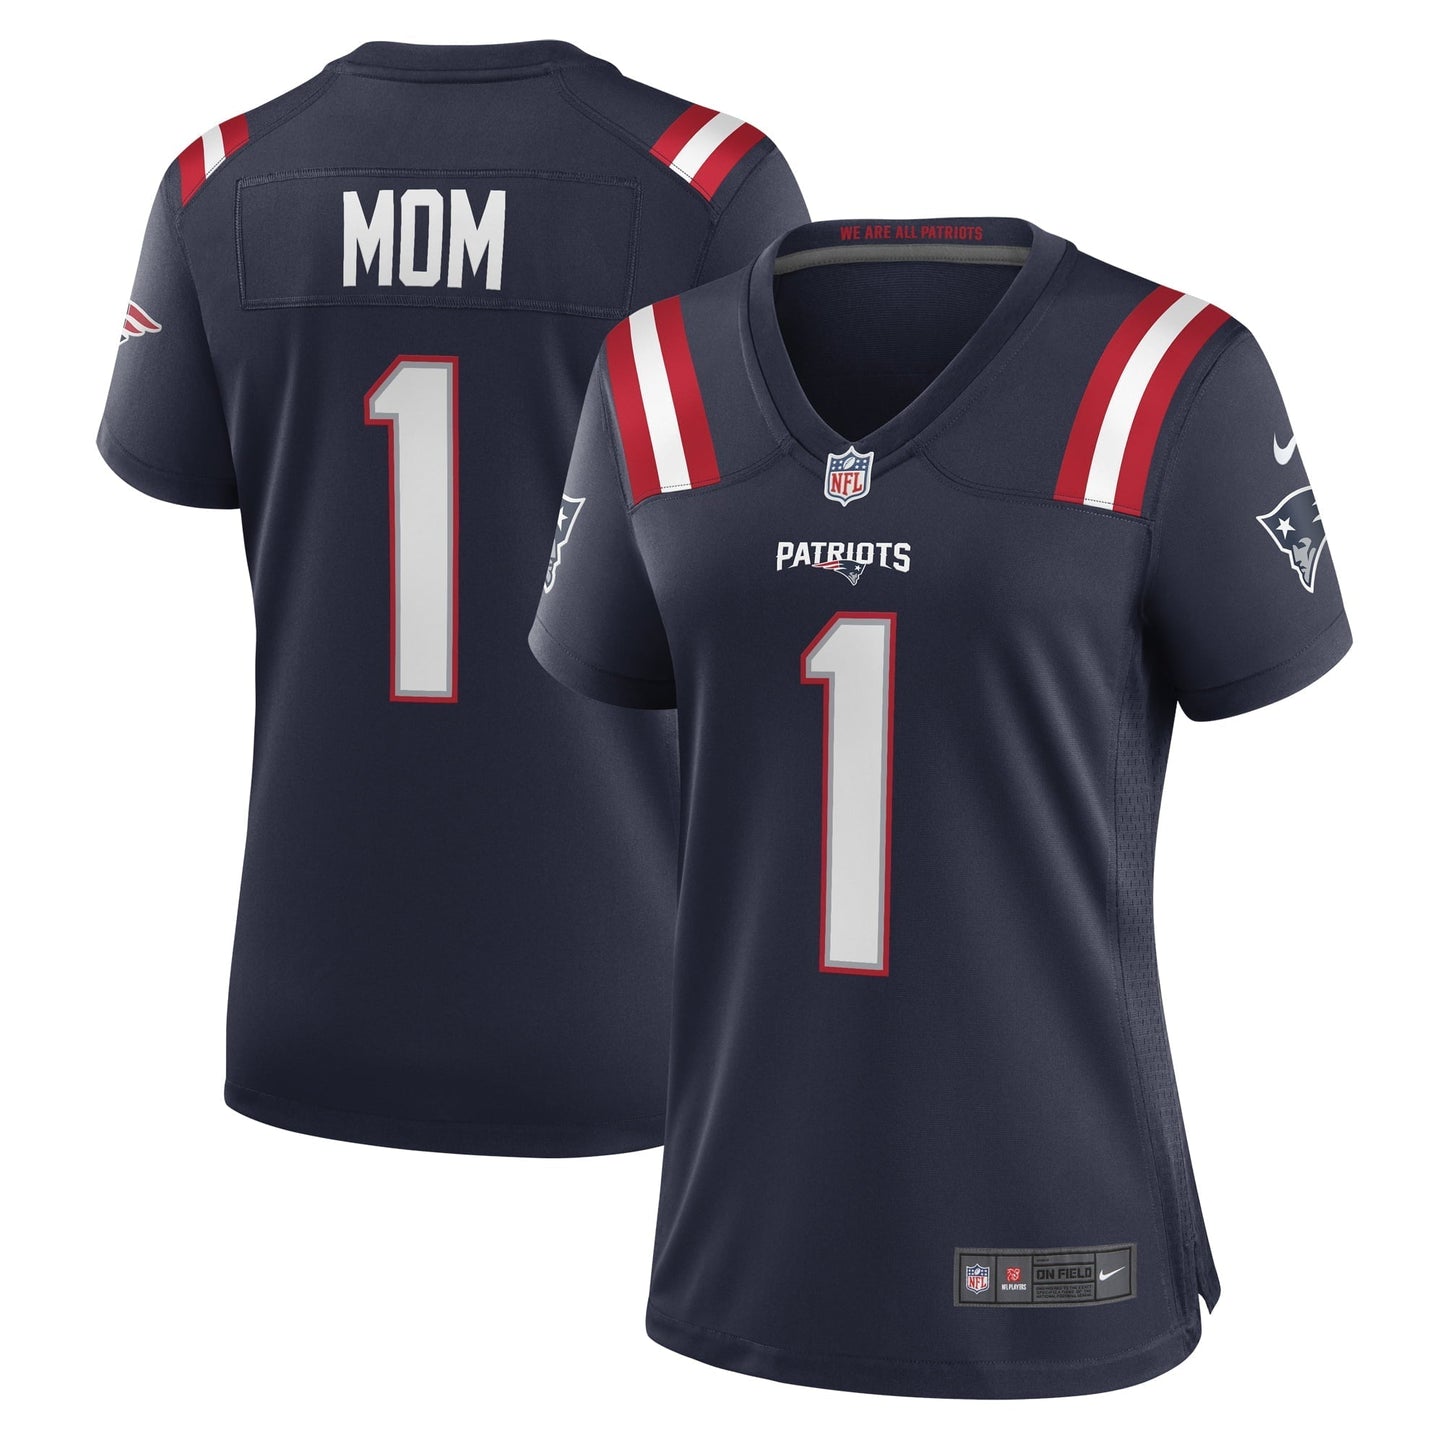 Women's Nike Number 1 Mom Navy New England Patriots Game Jersey